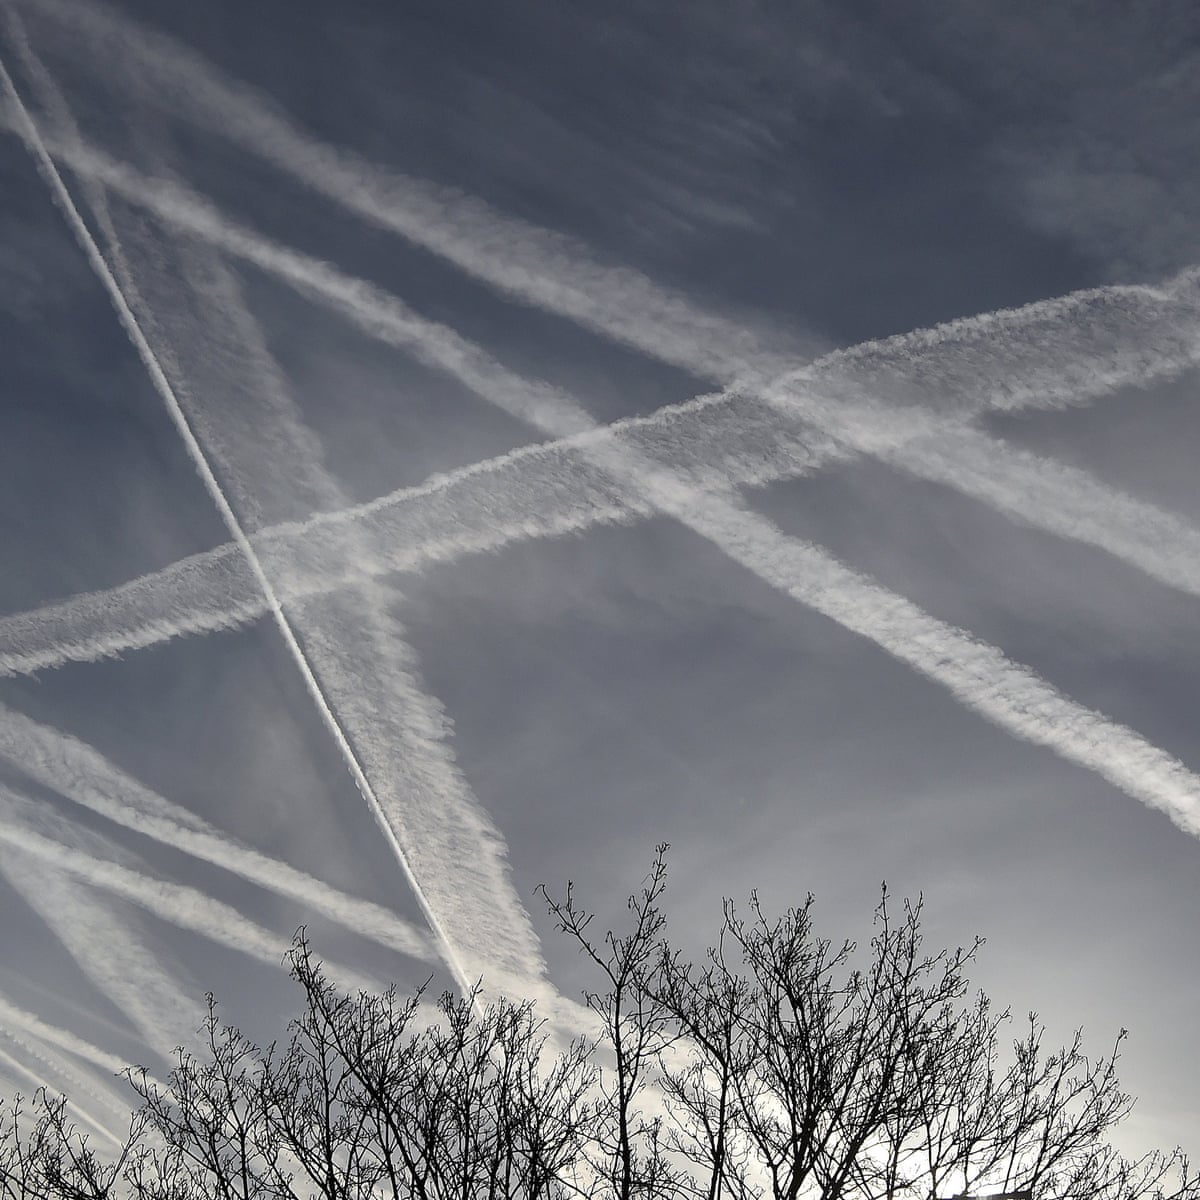 The contrails conspiracy is not only garbage, it&#39;s letting aviation off the hook too | George Monbiot | The Guardian